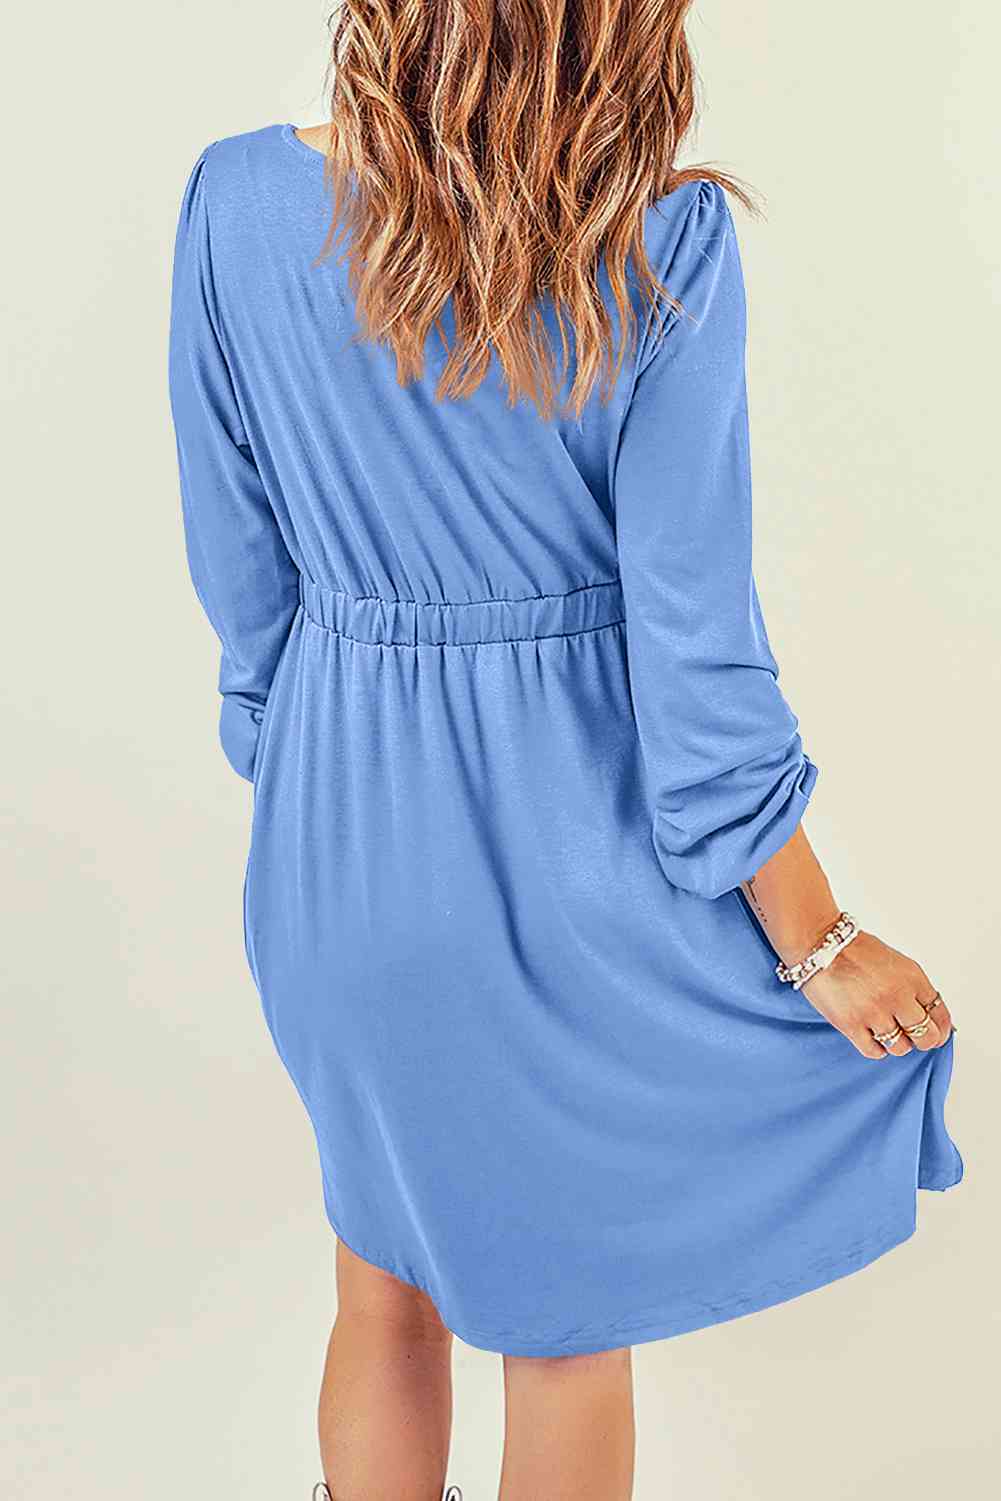 FULL SIZE Button Down Long Sleeve Dress with Pockets